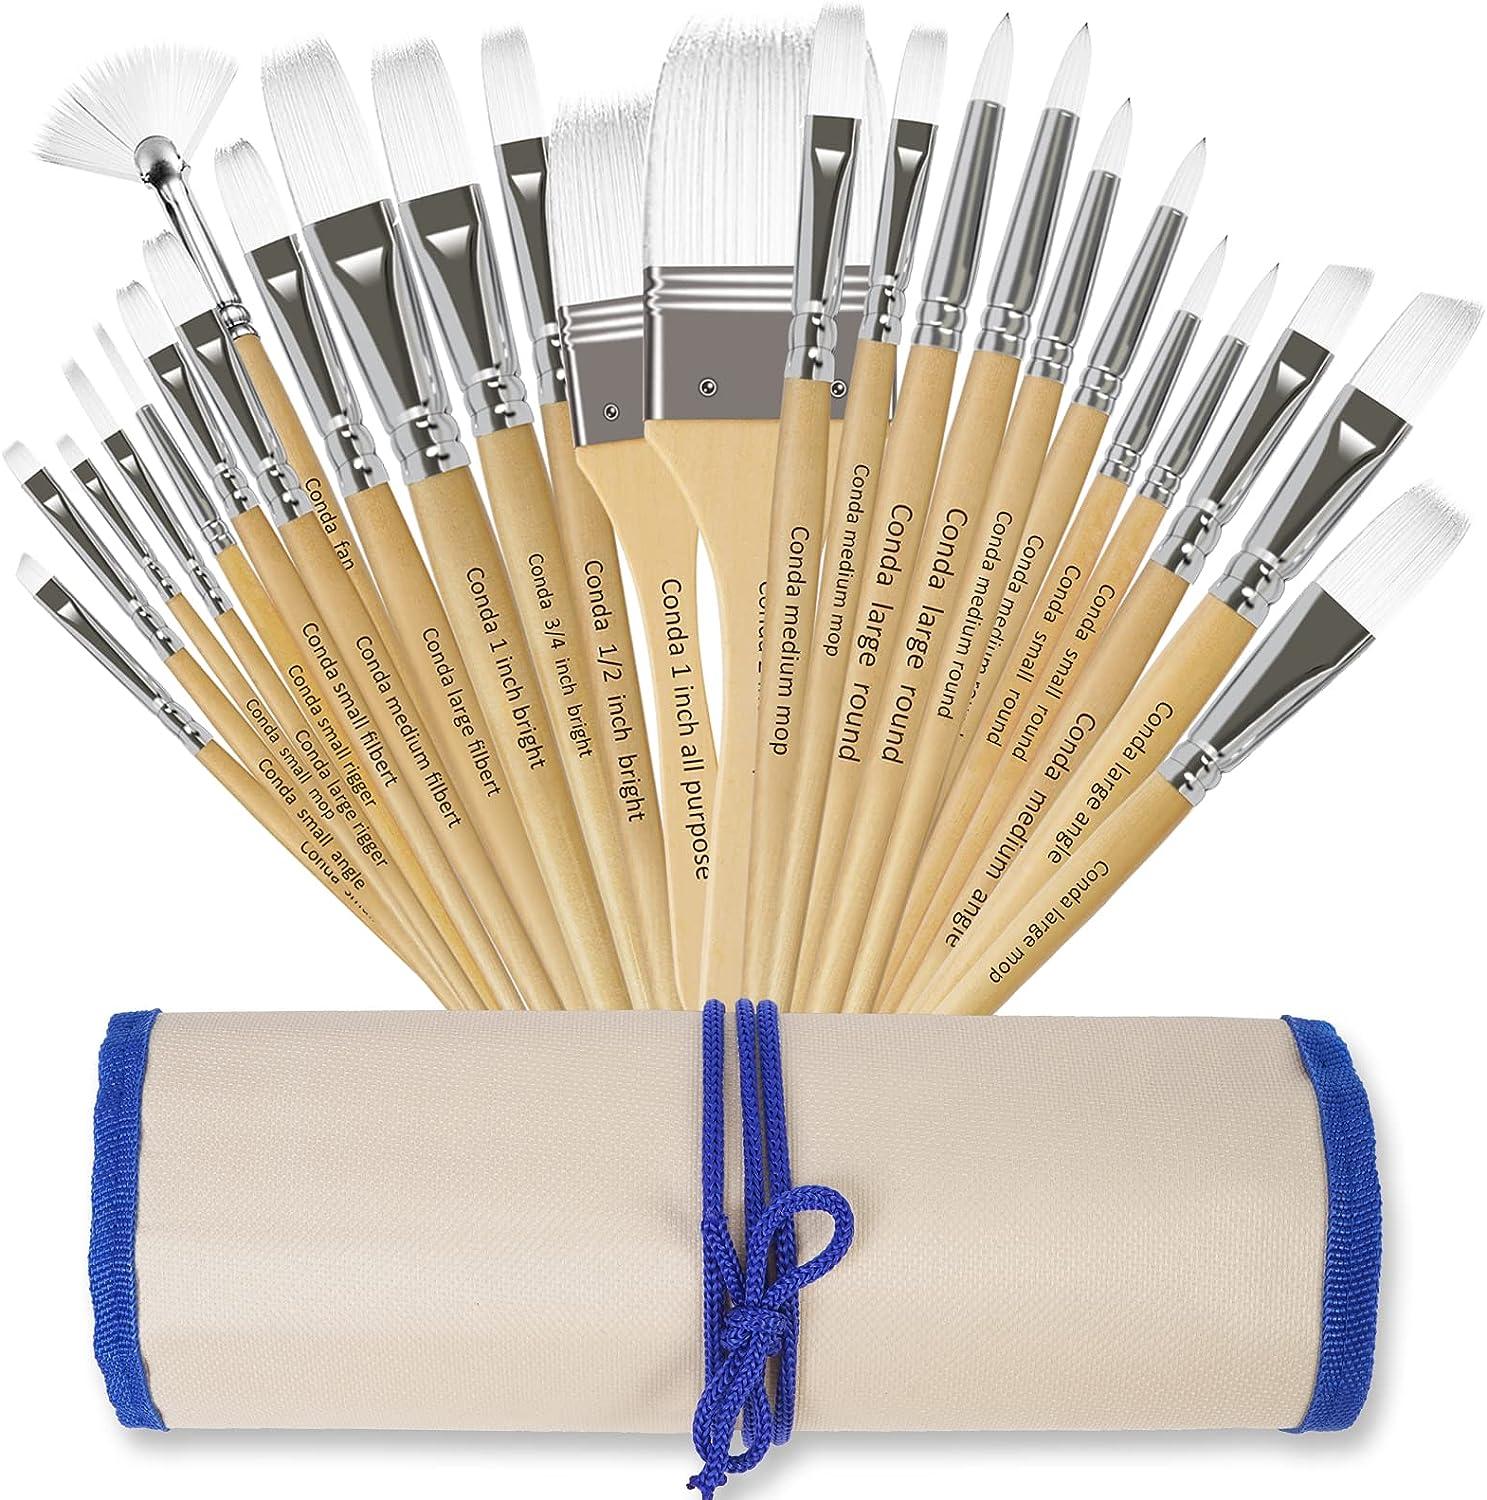 CONDA Paint Brushes Set of 24 Different Shapes Ergonomic Professional Wood  Handles with Organizing Case for Acrylic Oil Watercolor, Rock Painting